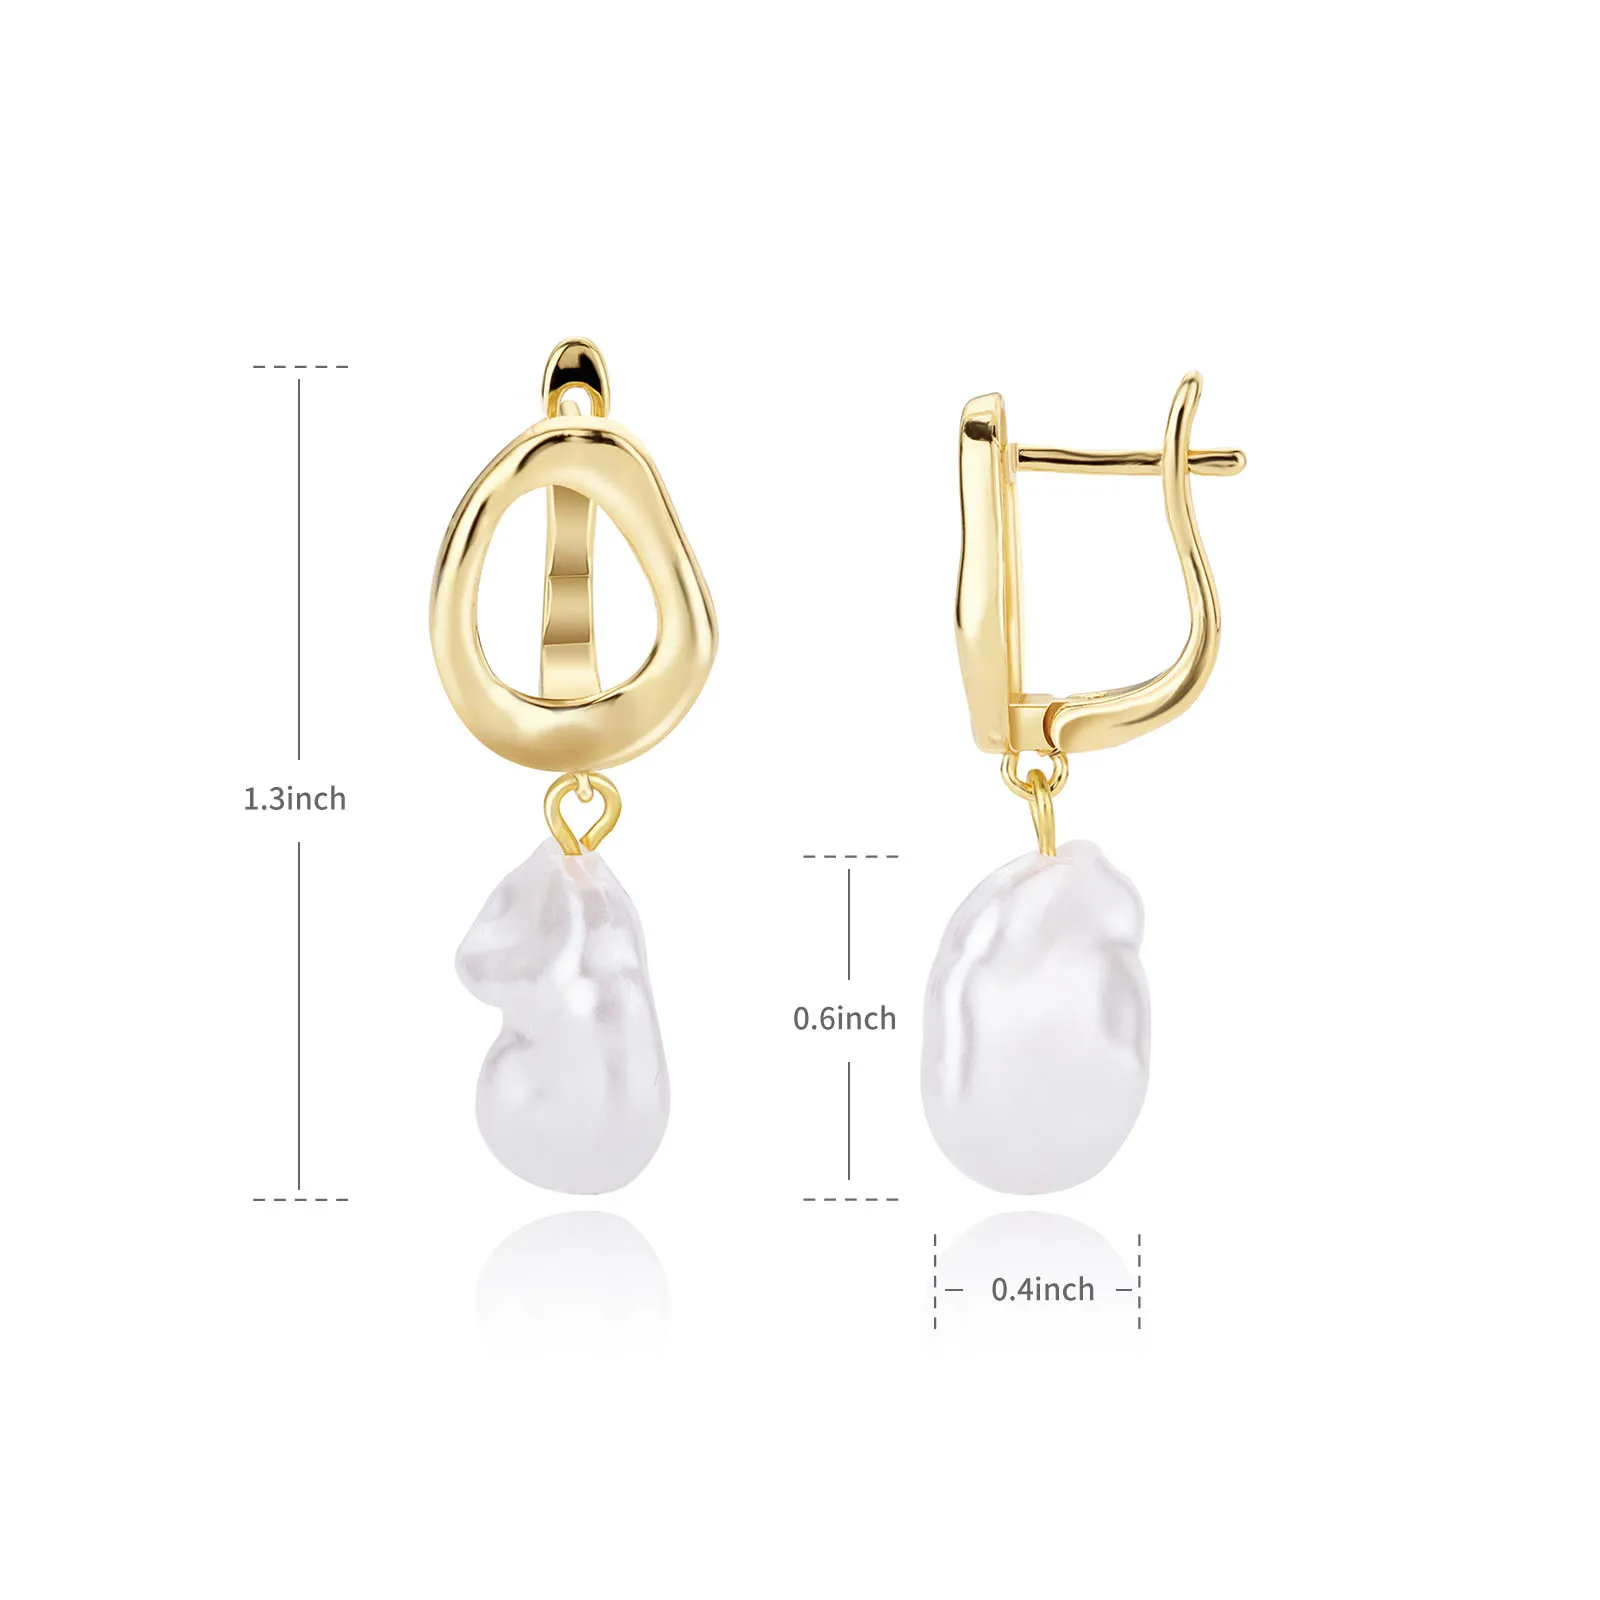 A fashionable pair of Circle Pearl Earrings for Women.